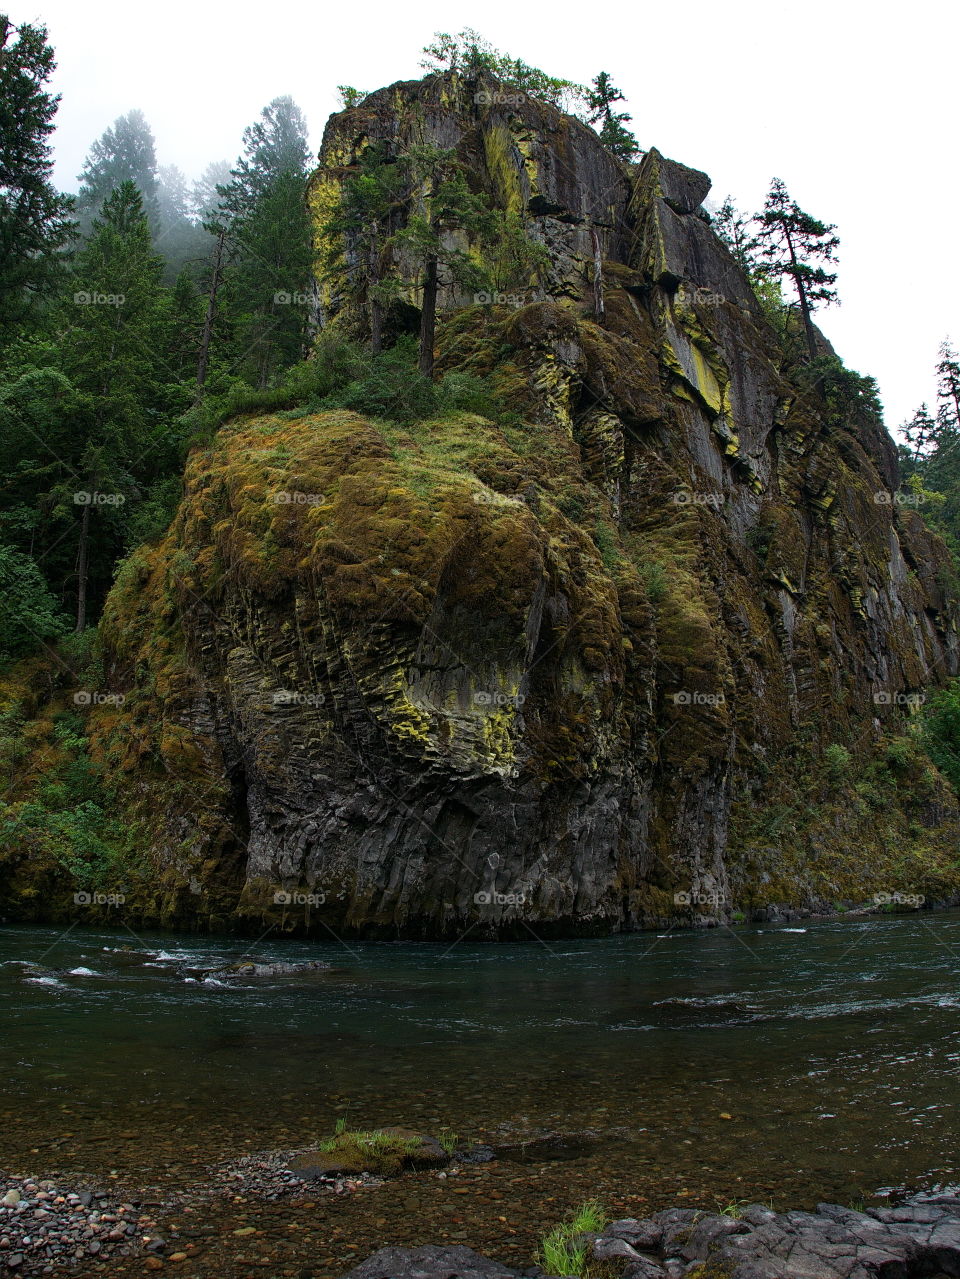 A rugged and rocky cliff covered with moss with trees growing on it sporadically on the banks of the North Umqua River in Southern Oregon with a fine mist in the air. 